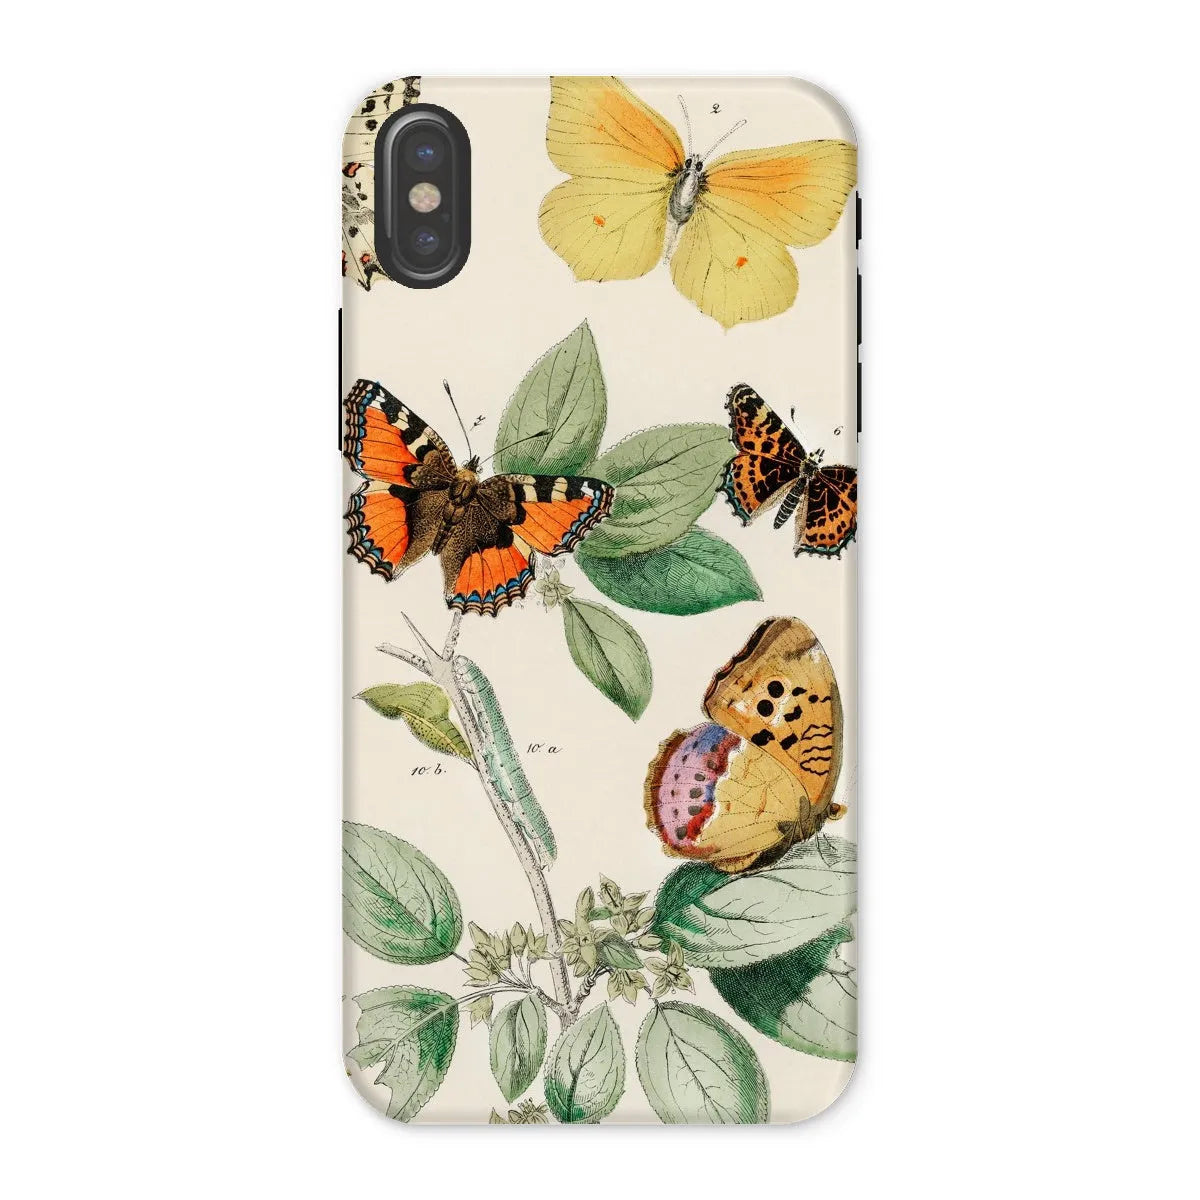 Butterfly Aesthetic Art Phone Case - William Forsell Kirby - Iphone x / Matte - Mobile Phone Cases - Aesthetic Art